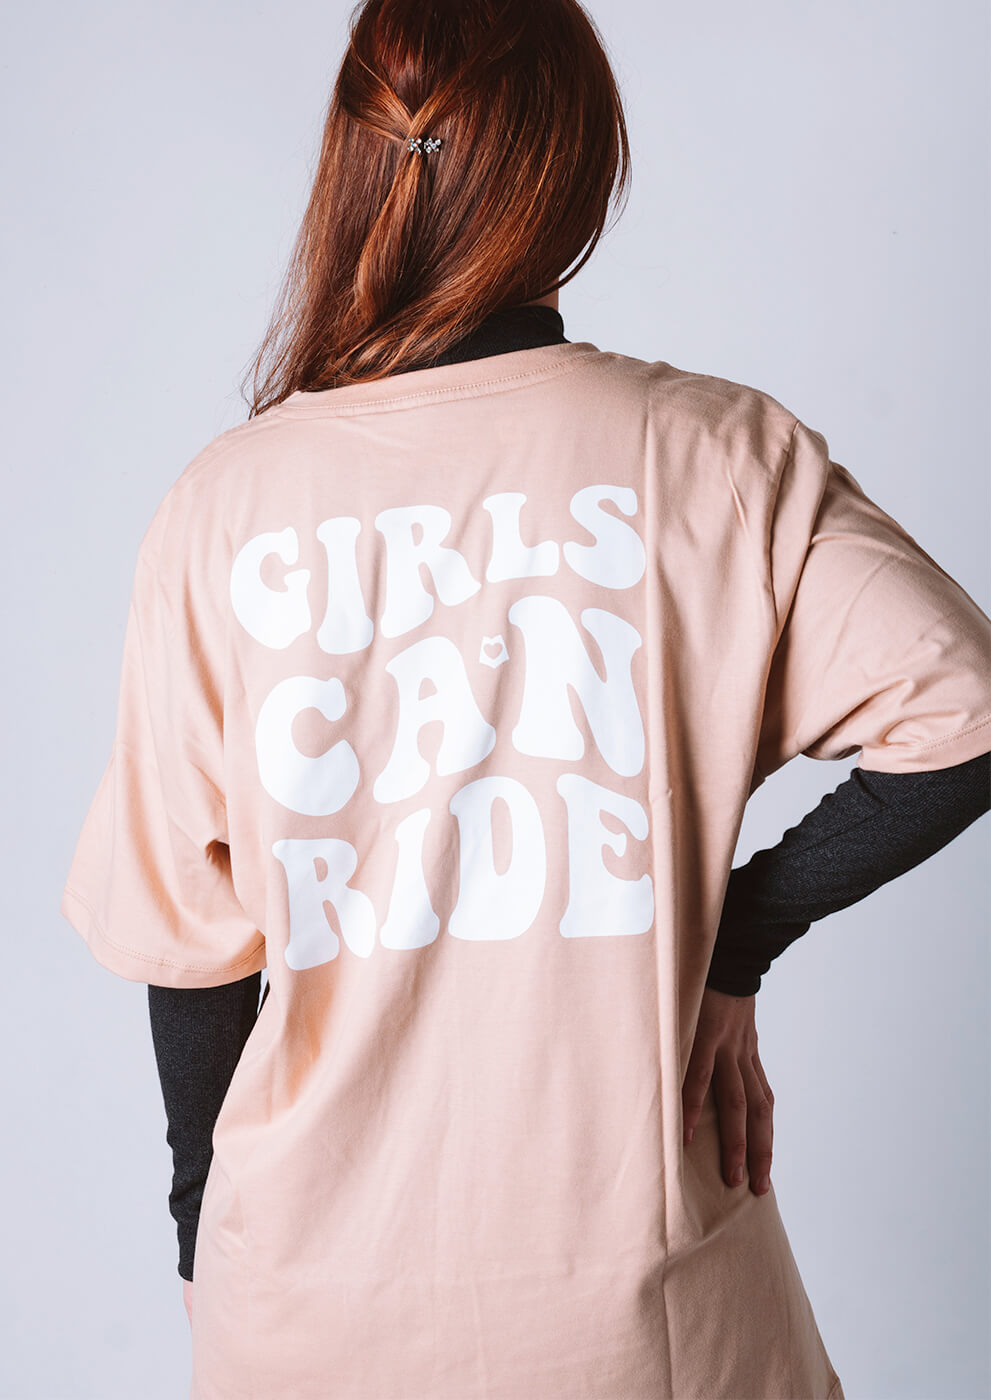 T-shirt over bege girls can ride